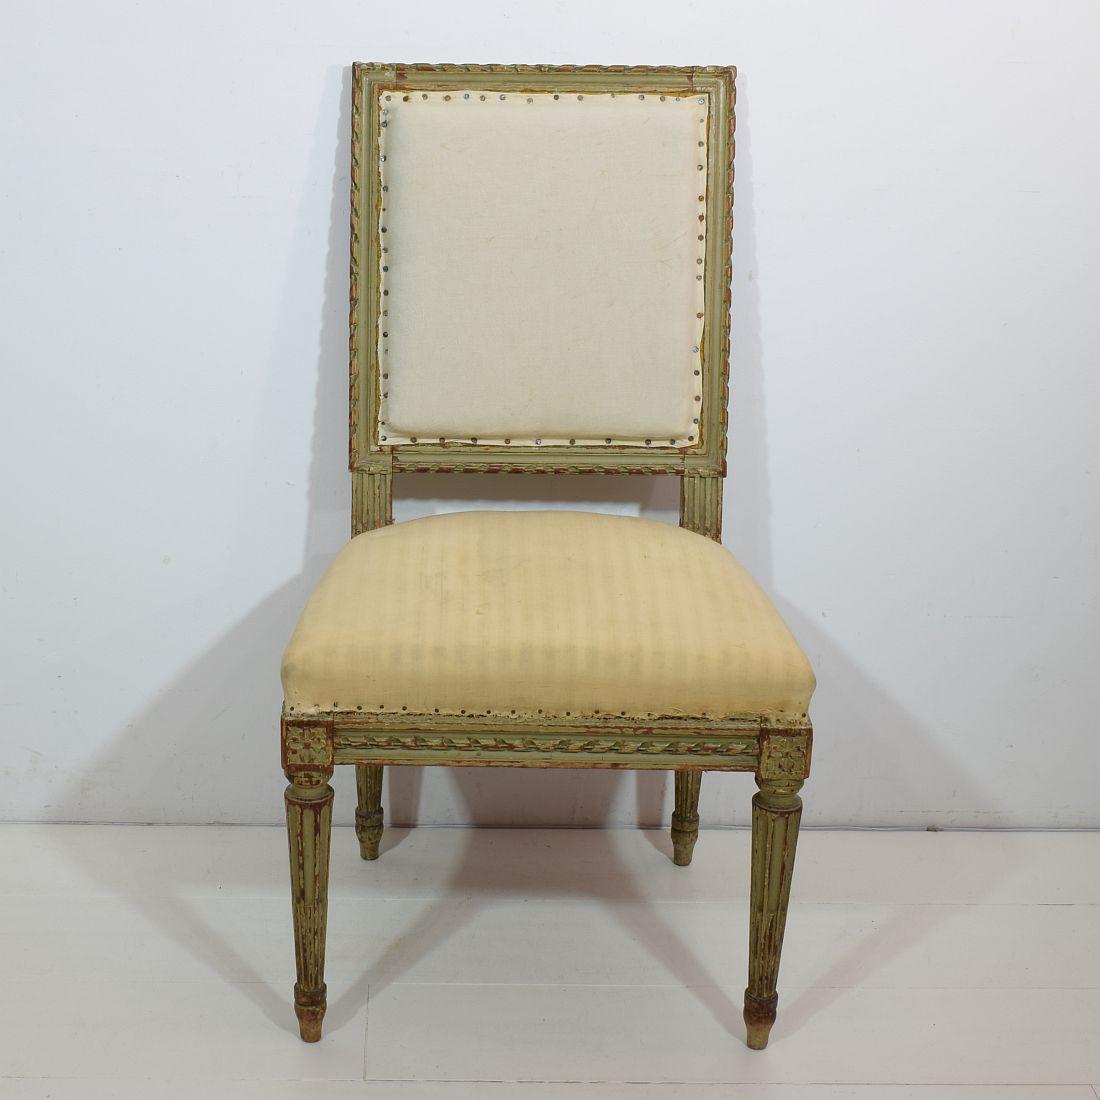 Pair of 19th Century French Painted Louis XVI Style Side Chairs (Französisch)